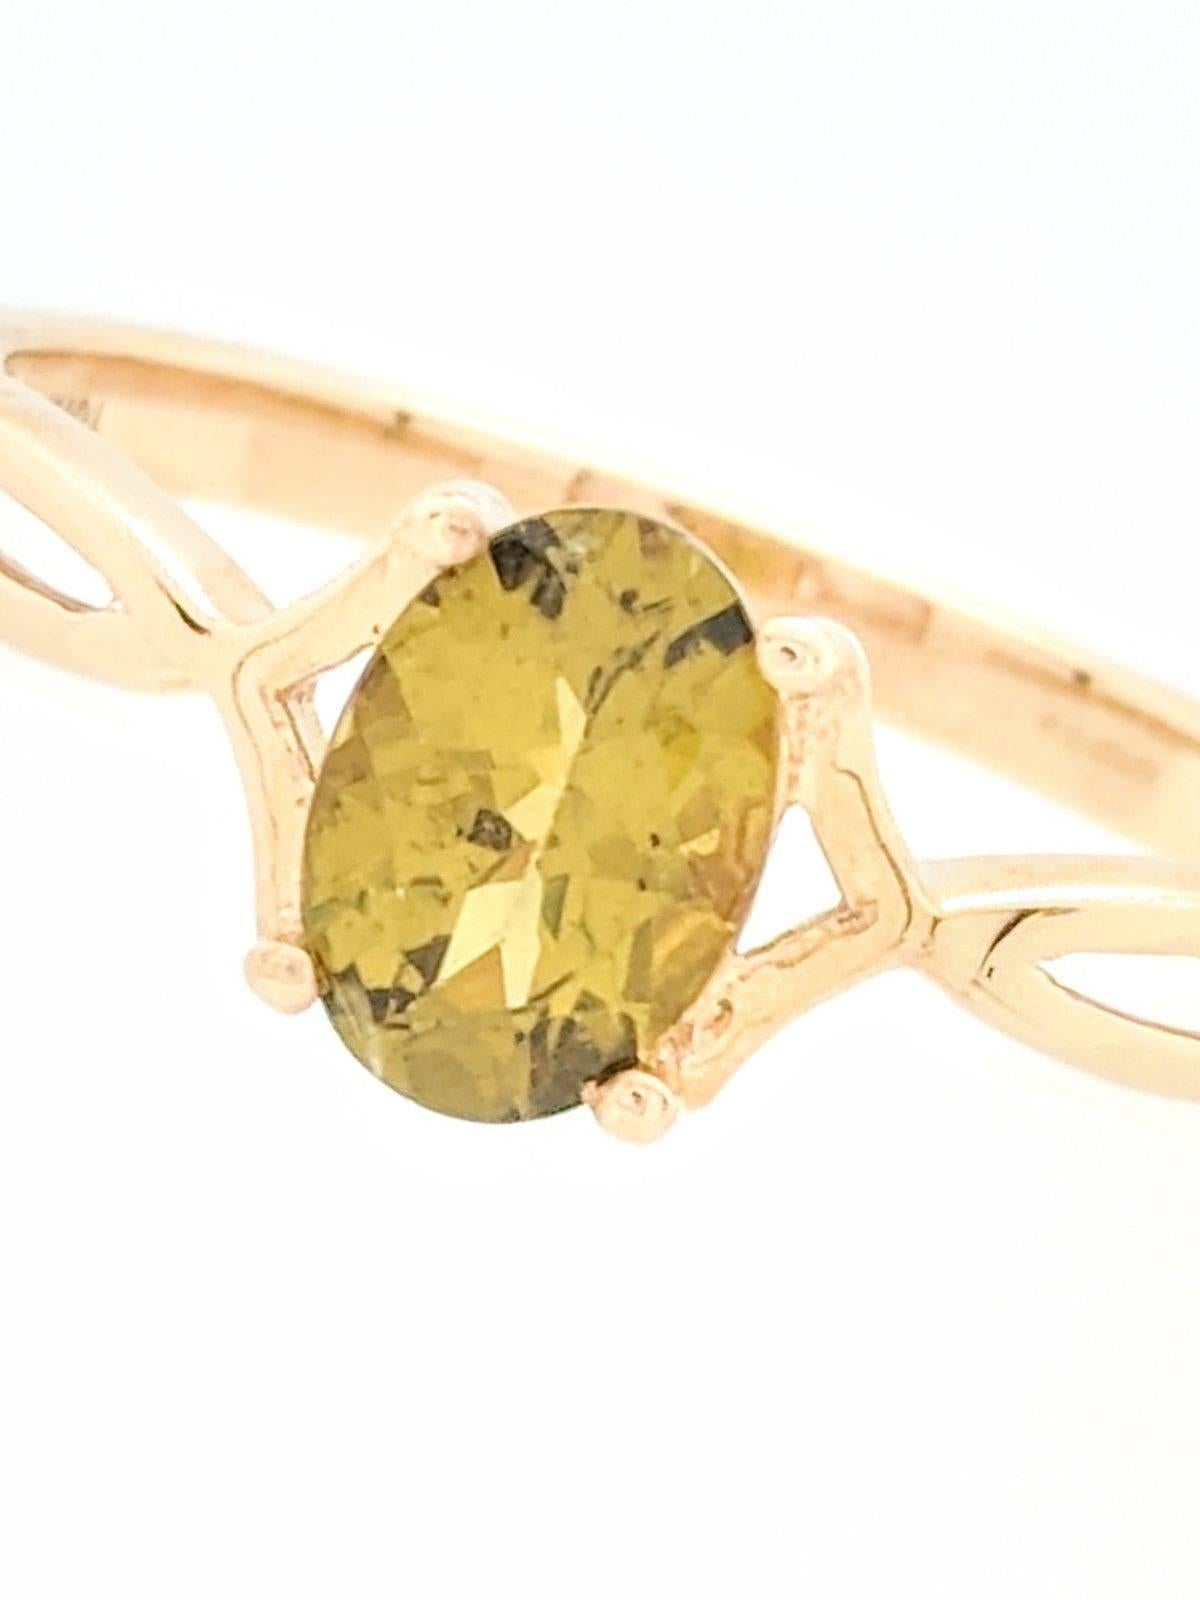  Ladies 10k Yellow Gold 1ct Peridot Ring Size 8

You are viewing a Beautiful Ladies Peridot Ring. This ring is crafted from 10k yellow gold and weighs 2.1 grams.  It features one (1) 1ct oval synthetic peridot which is individually prong set.